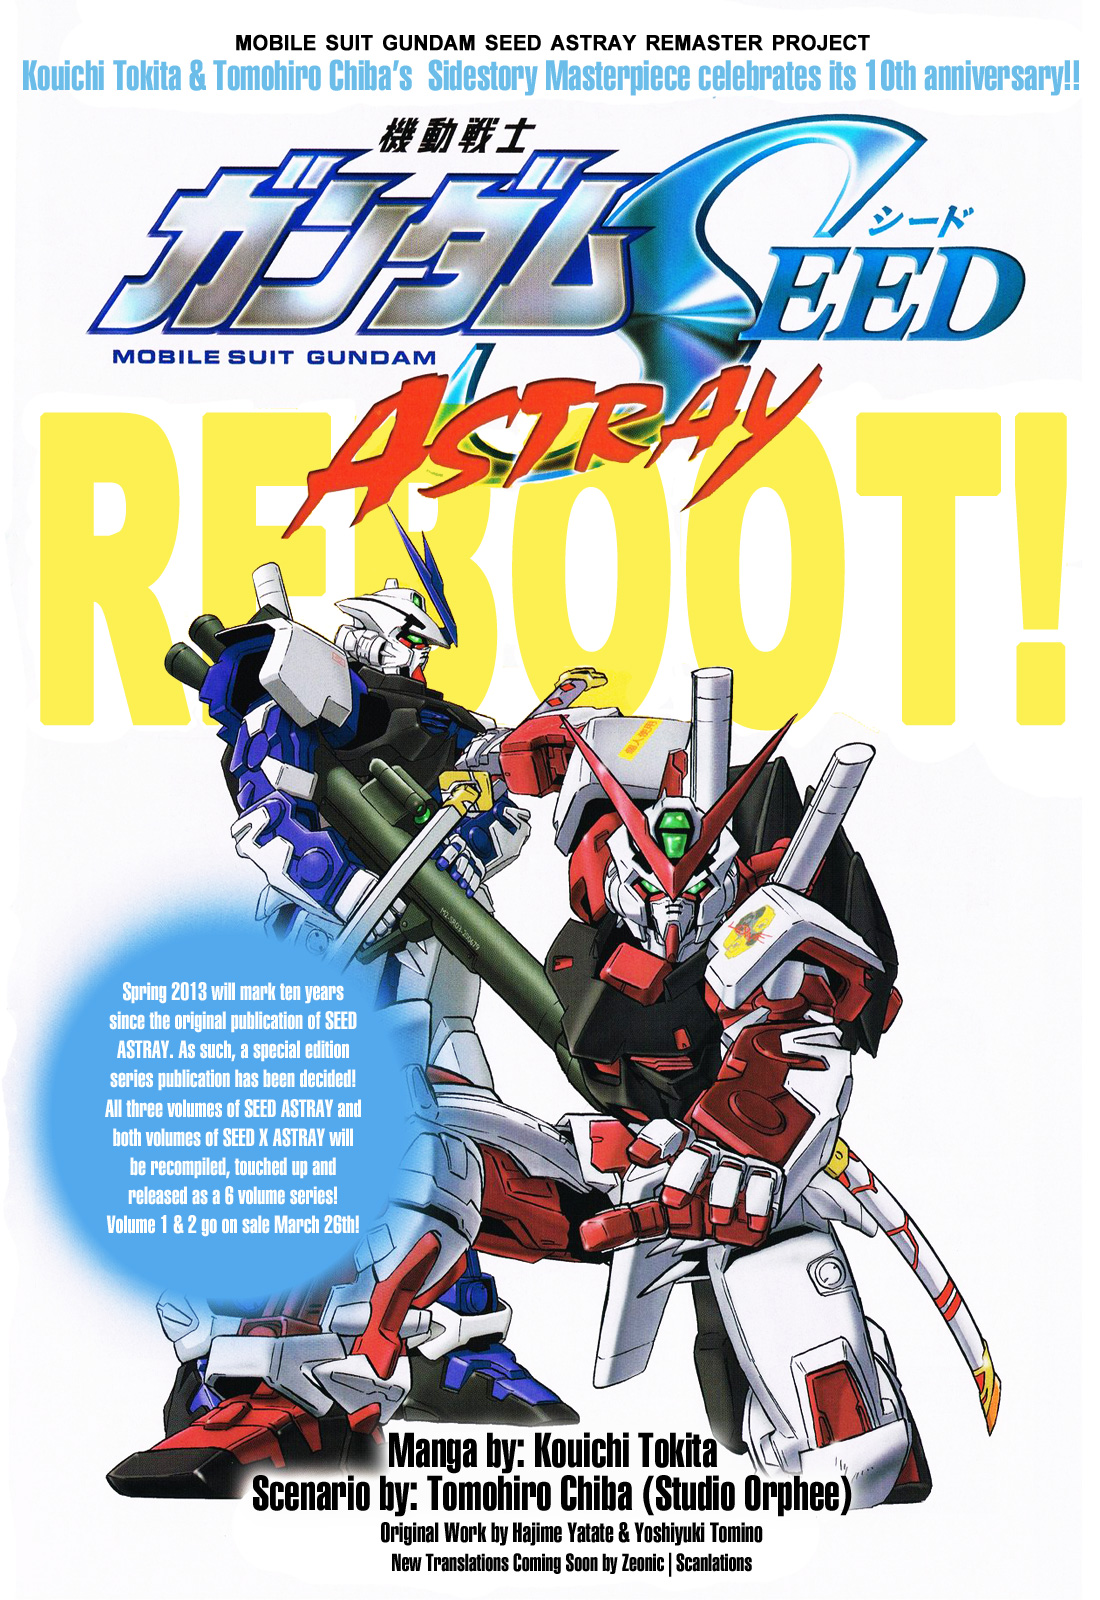 Mobile Suit Gundam Seed Astray Remaster Project March 2013 Poster Size Image Info Gunjap